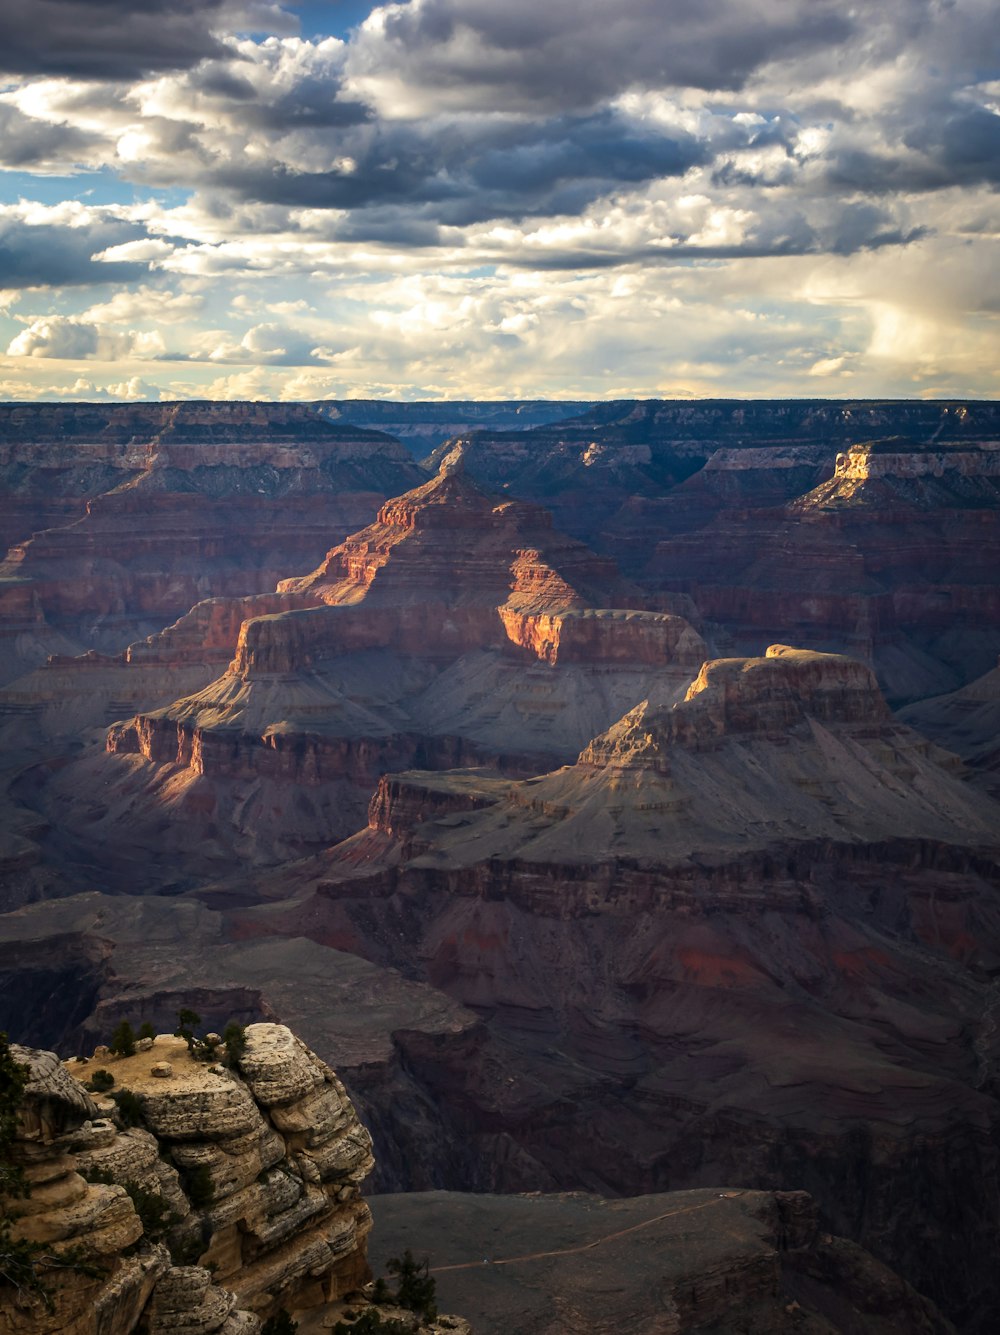 a view of the grand canyon from the rim of a cliff